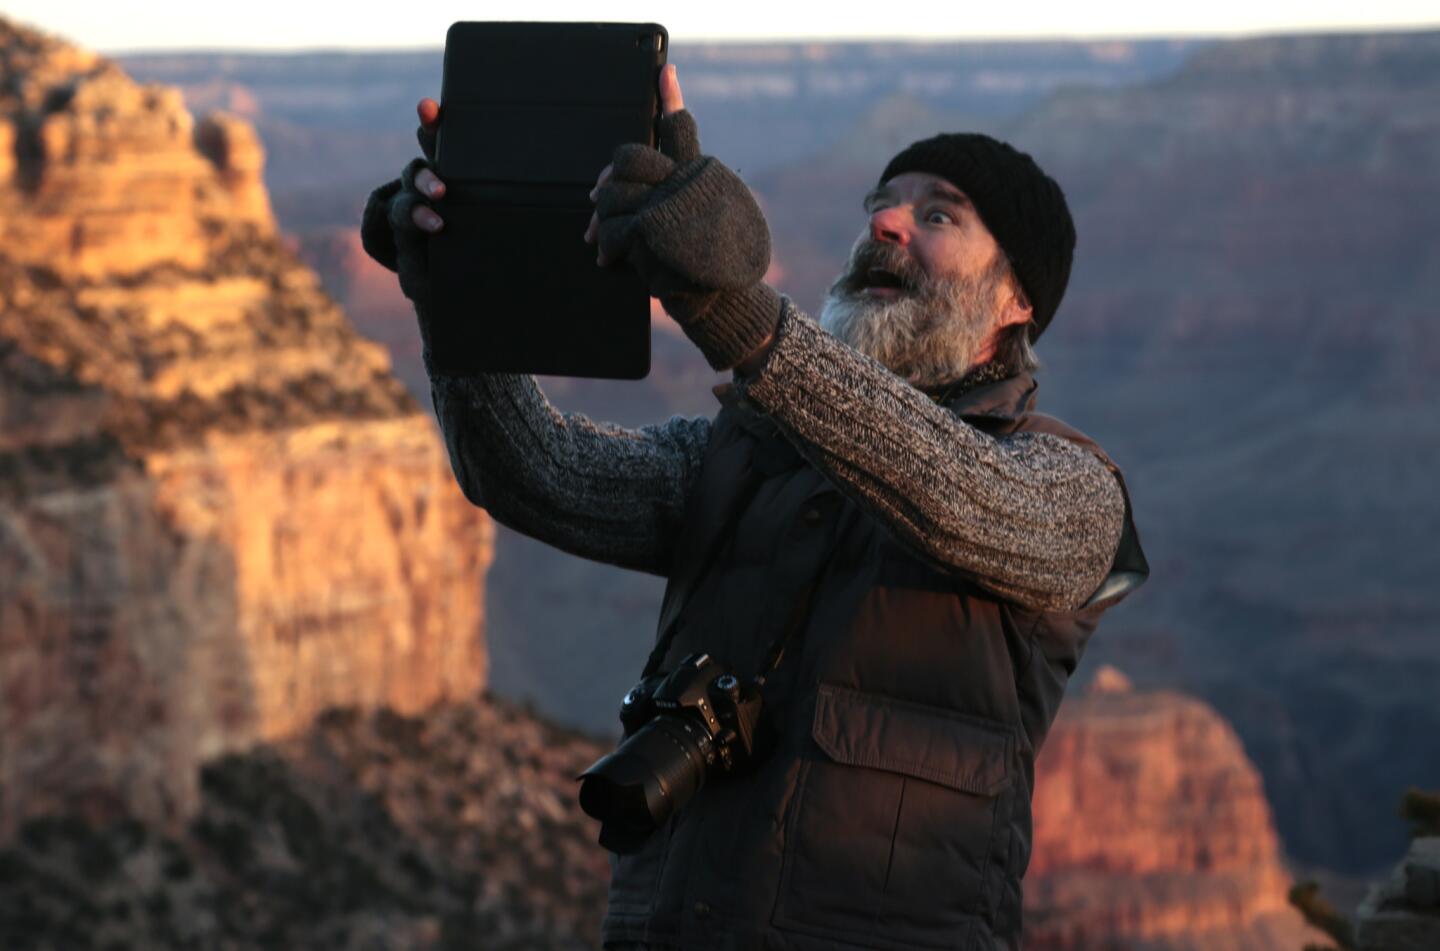 Artist Gregory Zeorlin smiles for a selfie on the South Rim.